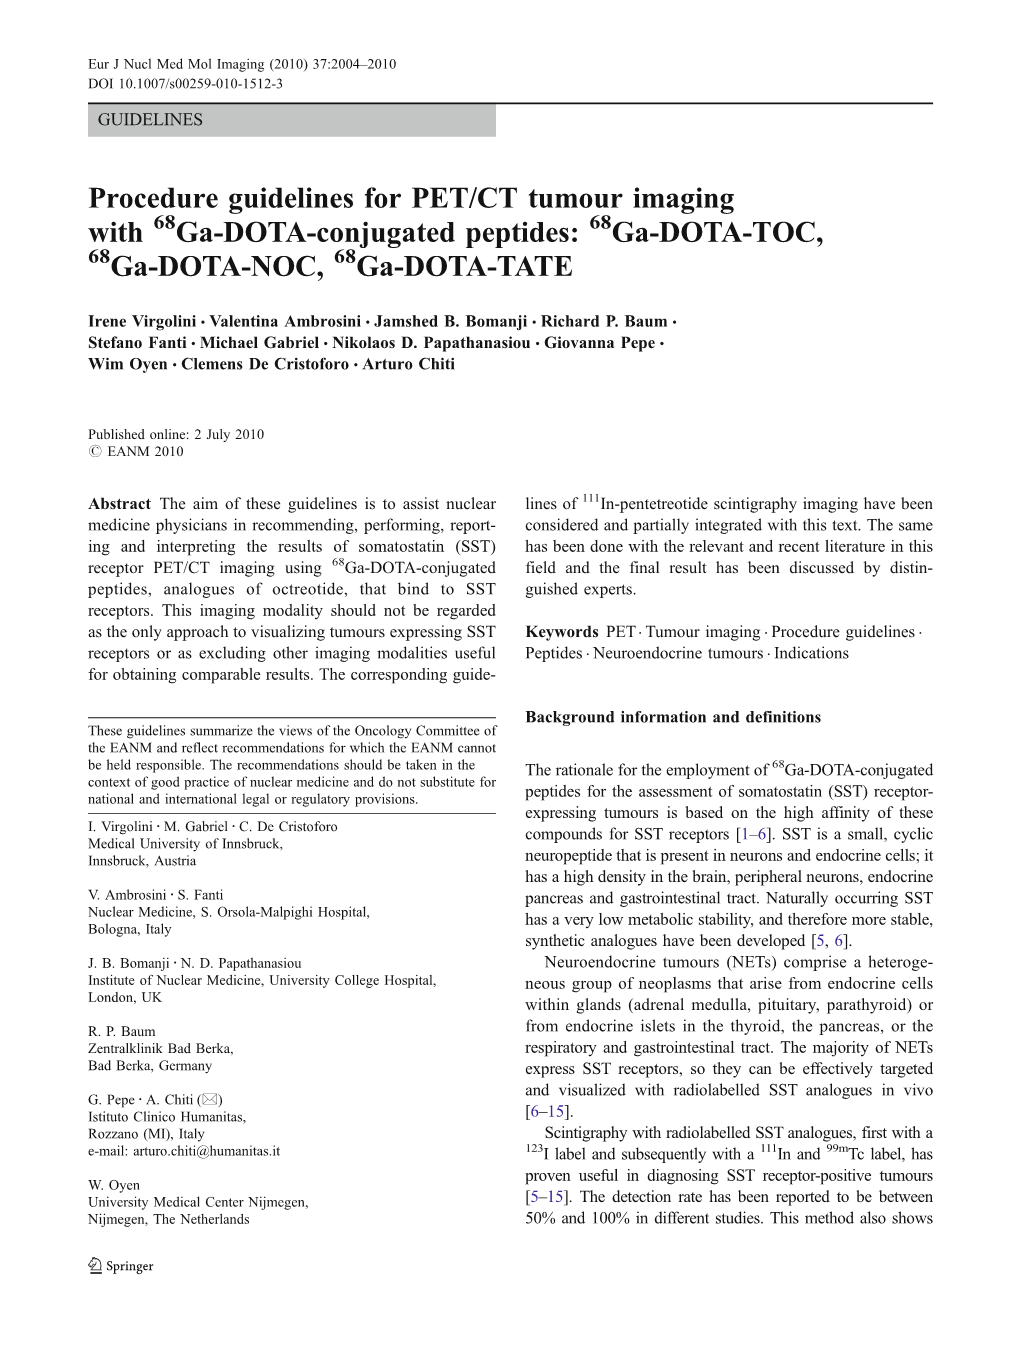 Procedure Guidelines for PET/CT Tumour Imaging with Ga-DOTA